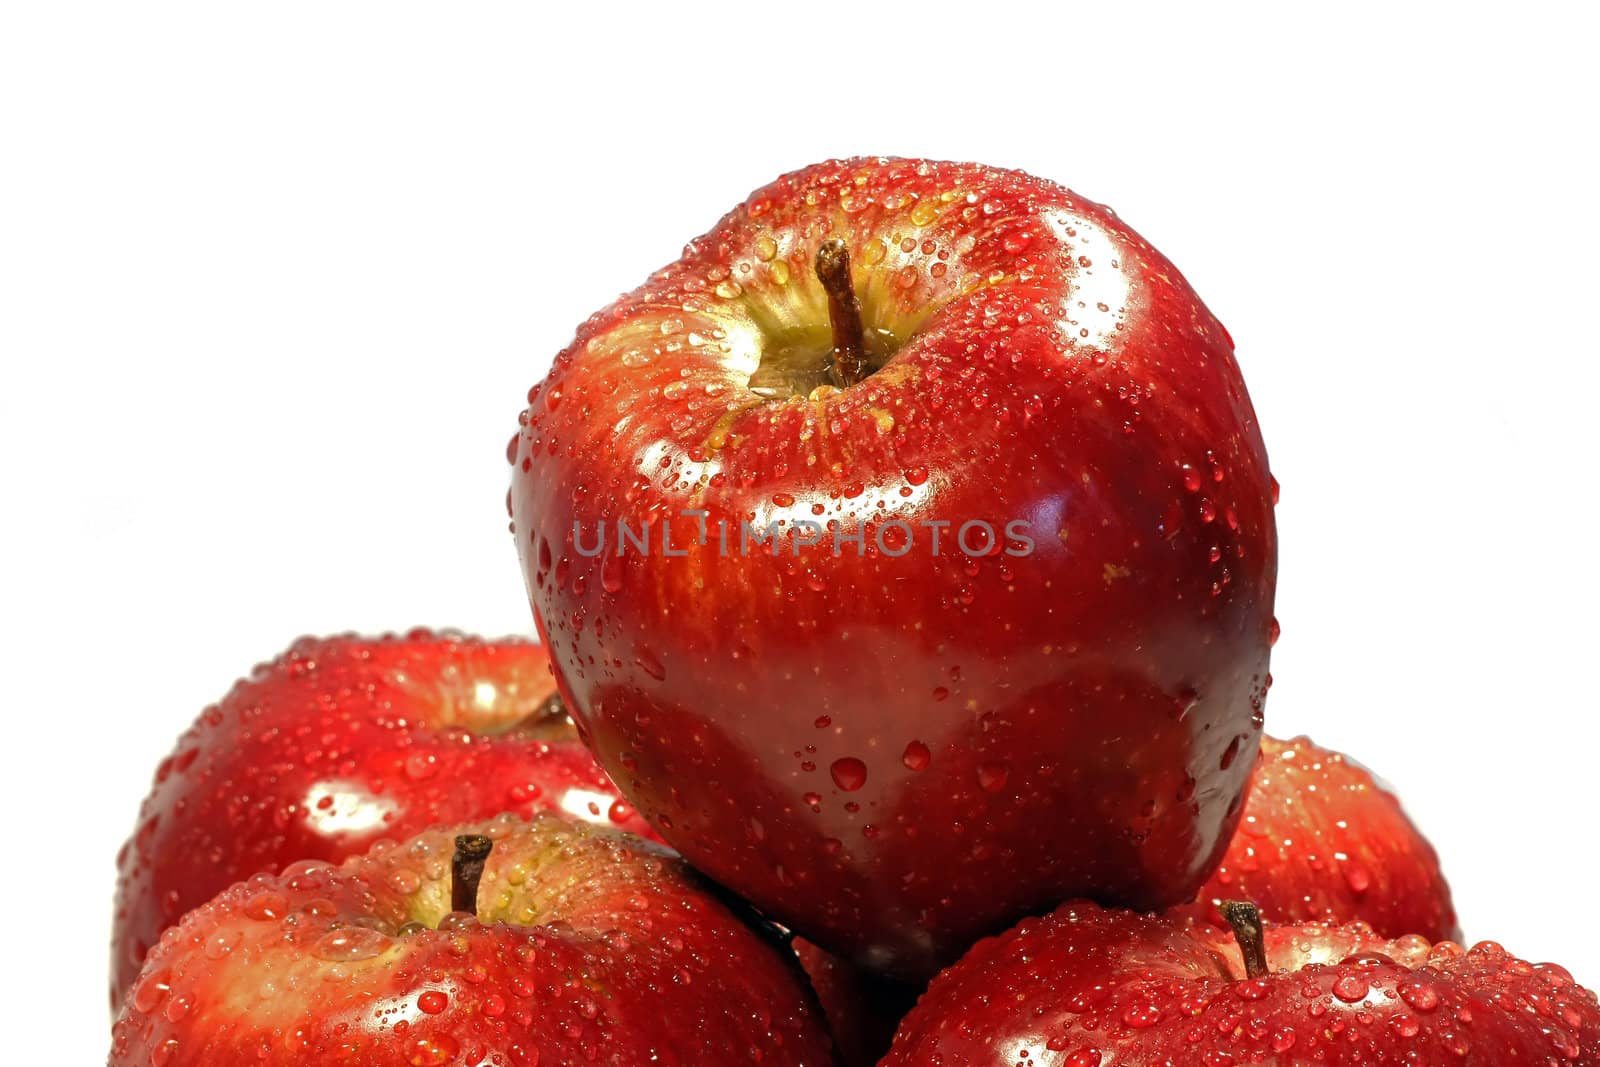 Red apple on top of others, isolated on a white background, with drops of water.